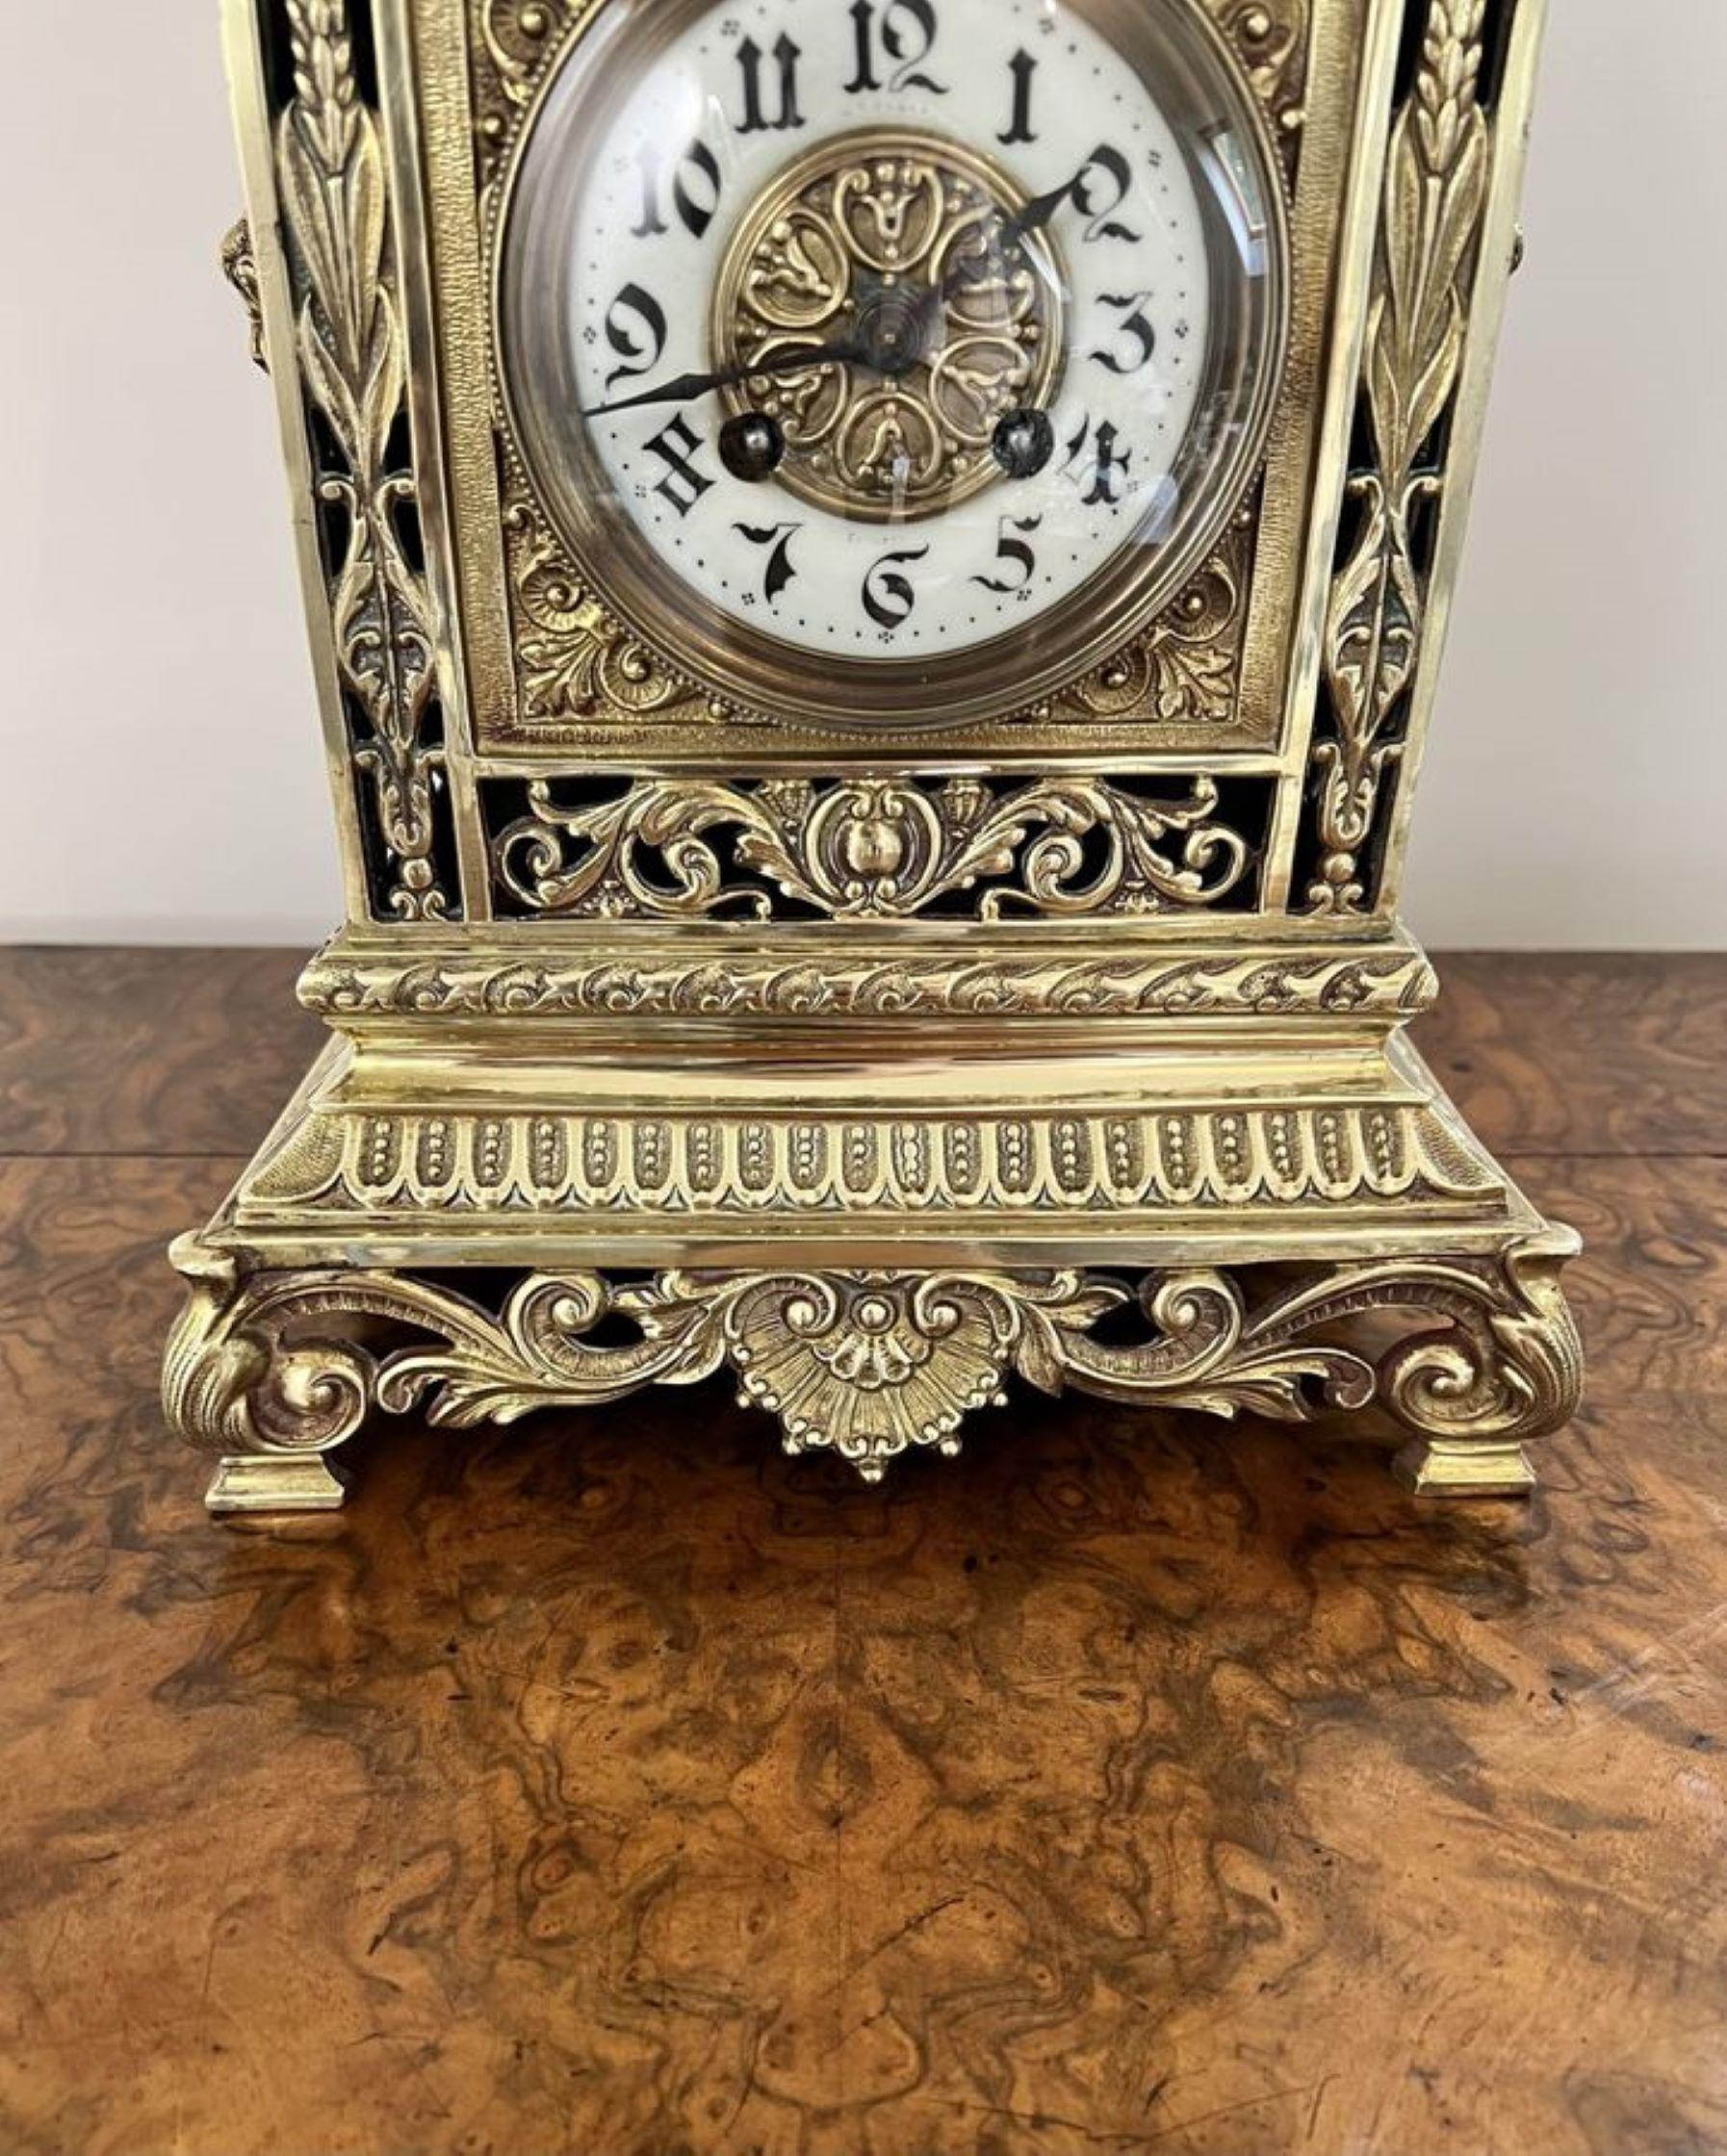 Outstanding quality large antique Victorian ornate brass mantle clock, having a fantastic ornate brass detailed case throughout, square in shape with a white enamel dial and Arabic numerals, the original hands, an eight day French movement striking